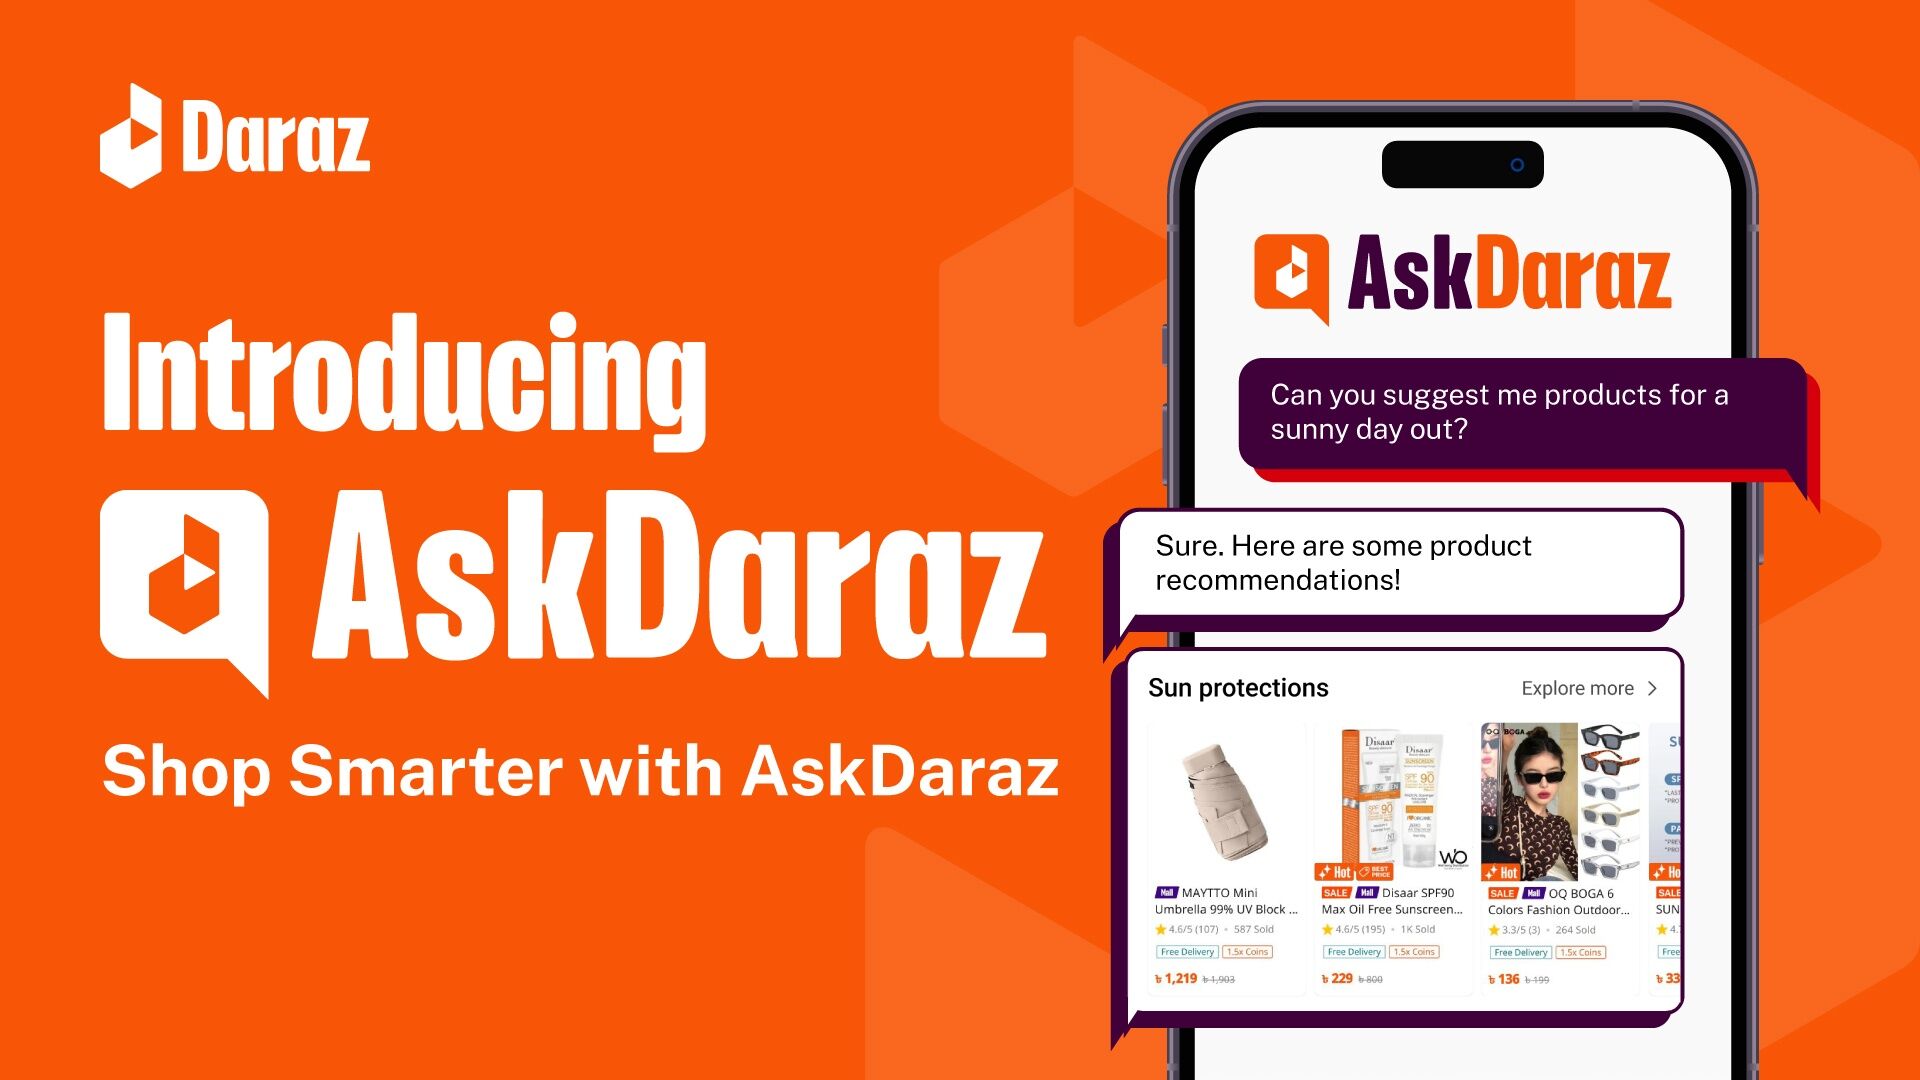 Daraz Officially Launches AskDaraz to Empower South Asian Users’ Shopping Experience With Microsoft Azure OpenAI Service-Markedium